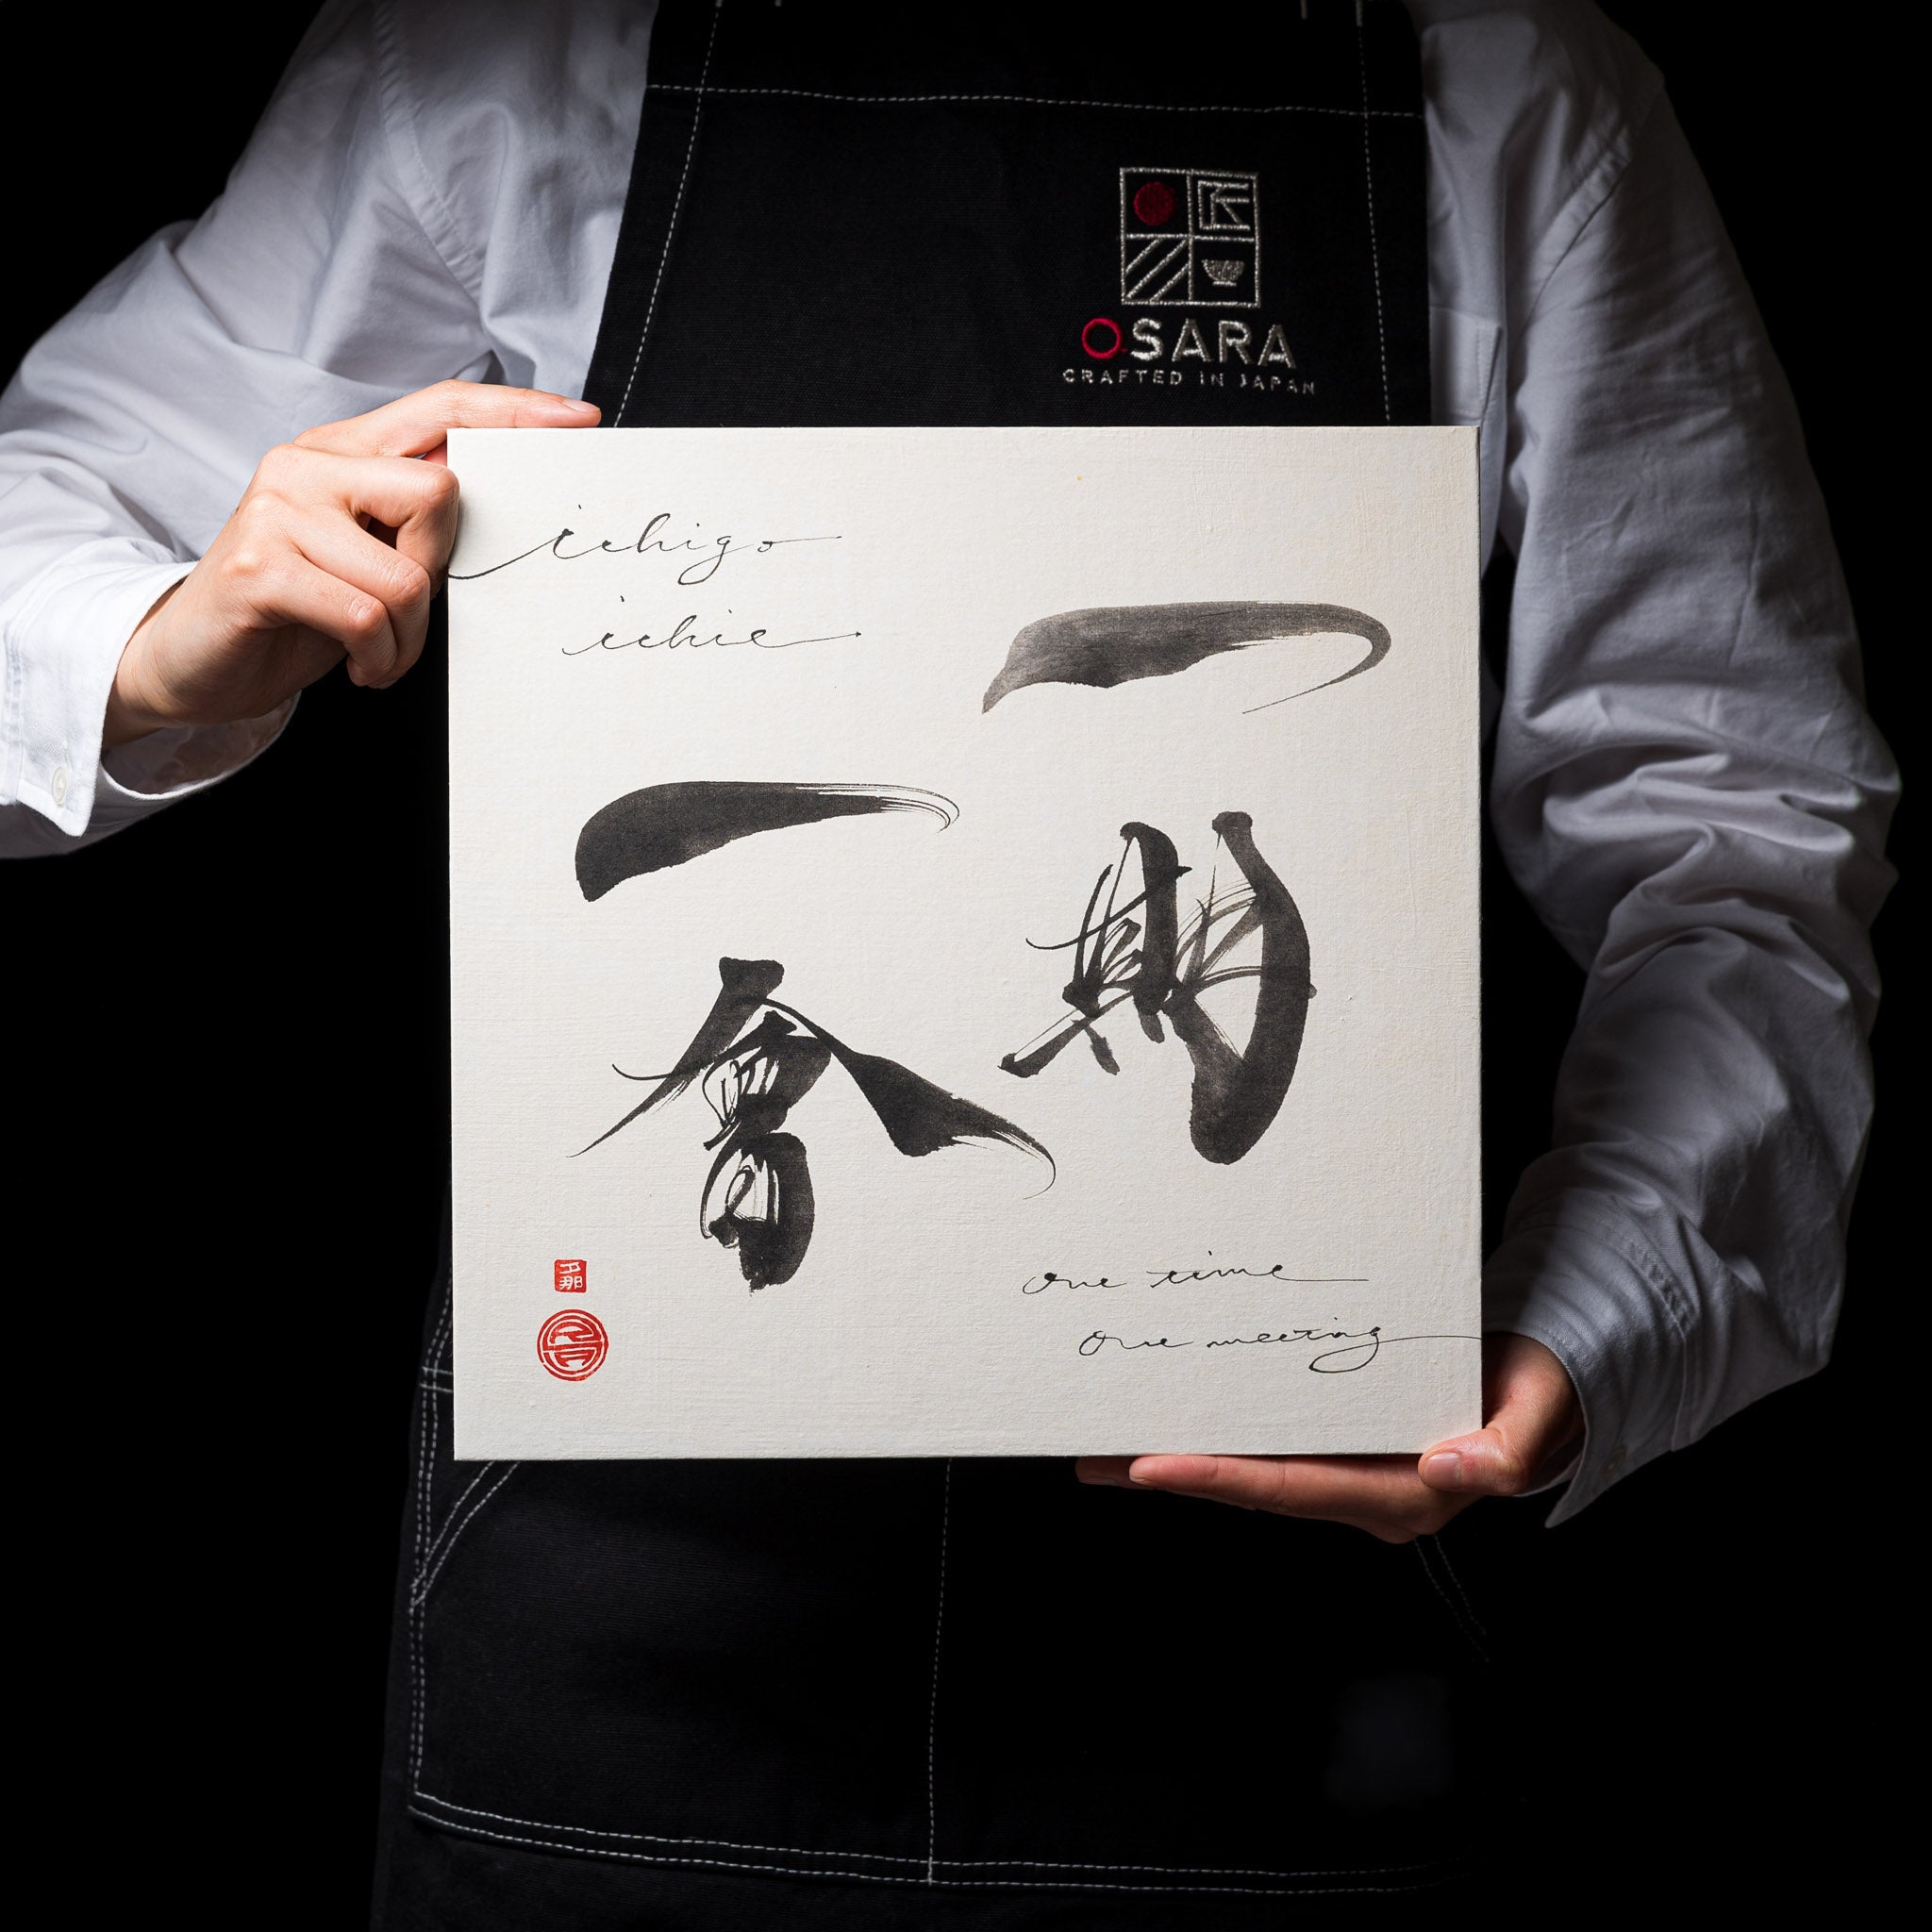 Japanese Calligraphy - One Time One Meeting "一期一会"